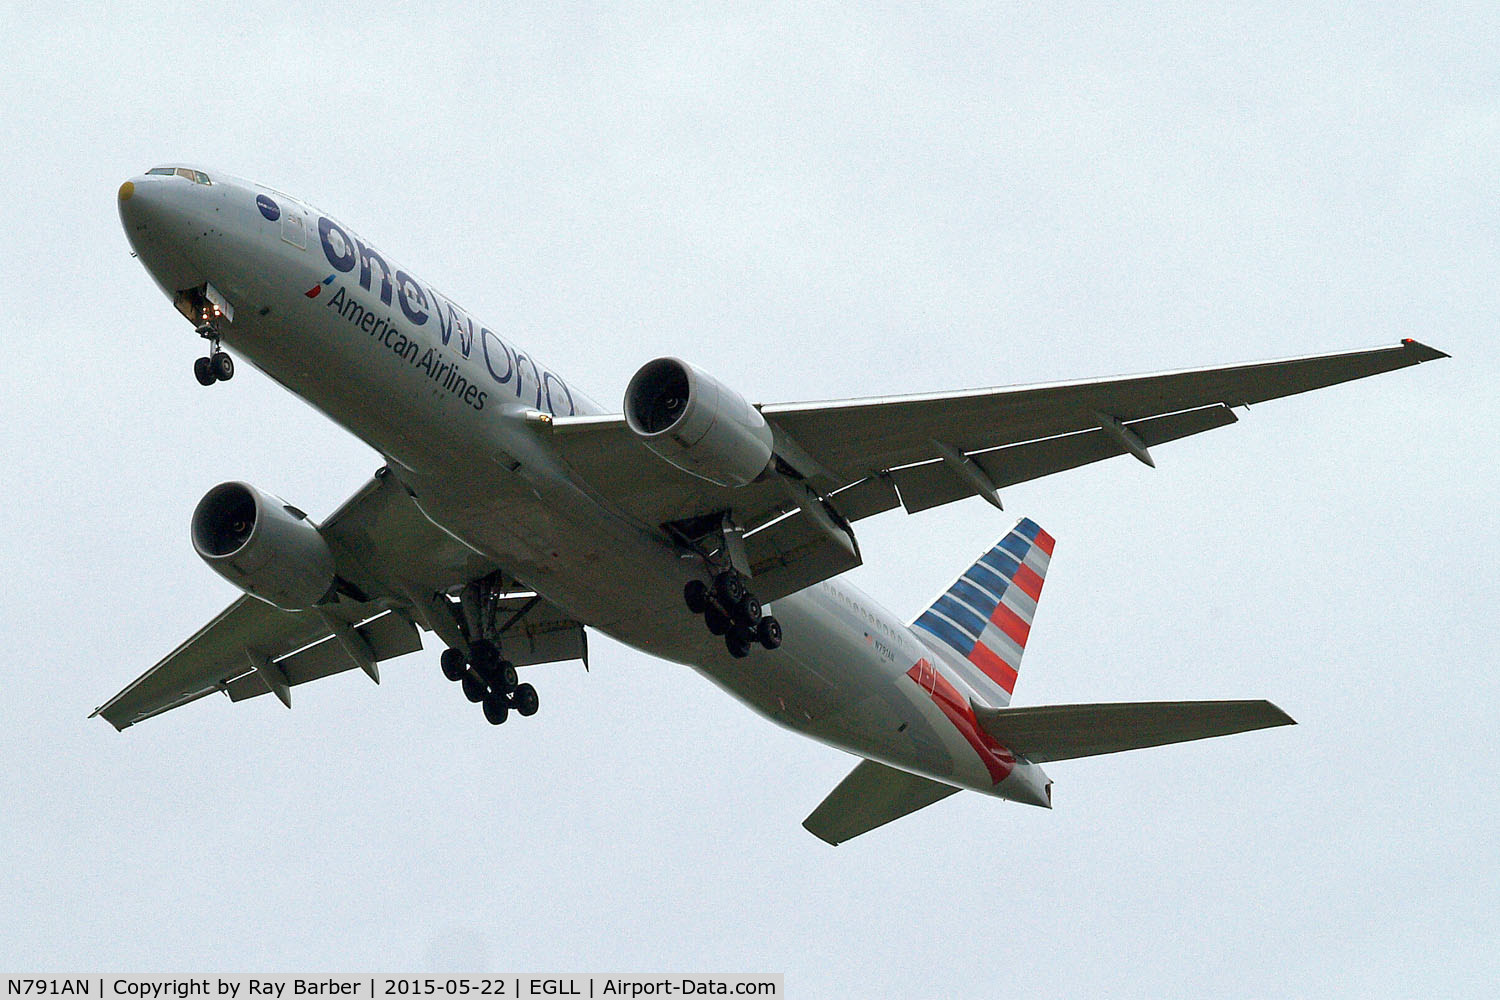 N791AN, 2000 Boeing 777-223/ER C/N 30254, Boeing 777-223ER [30254] (American Airlines) Home~G 22/05/2015. On approach 27R.